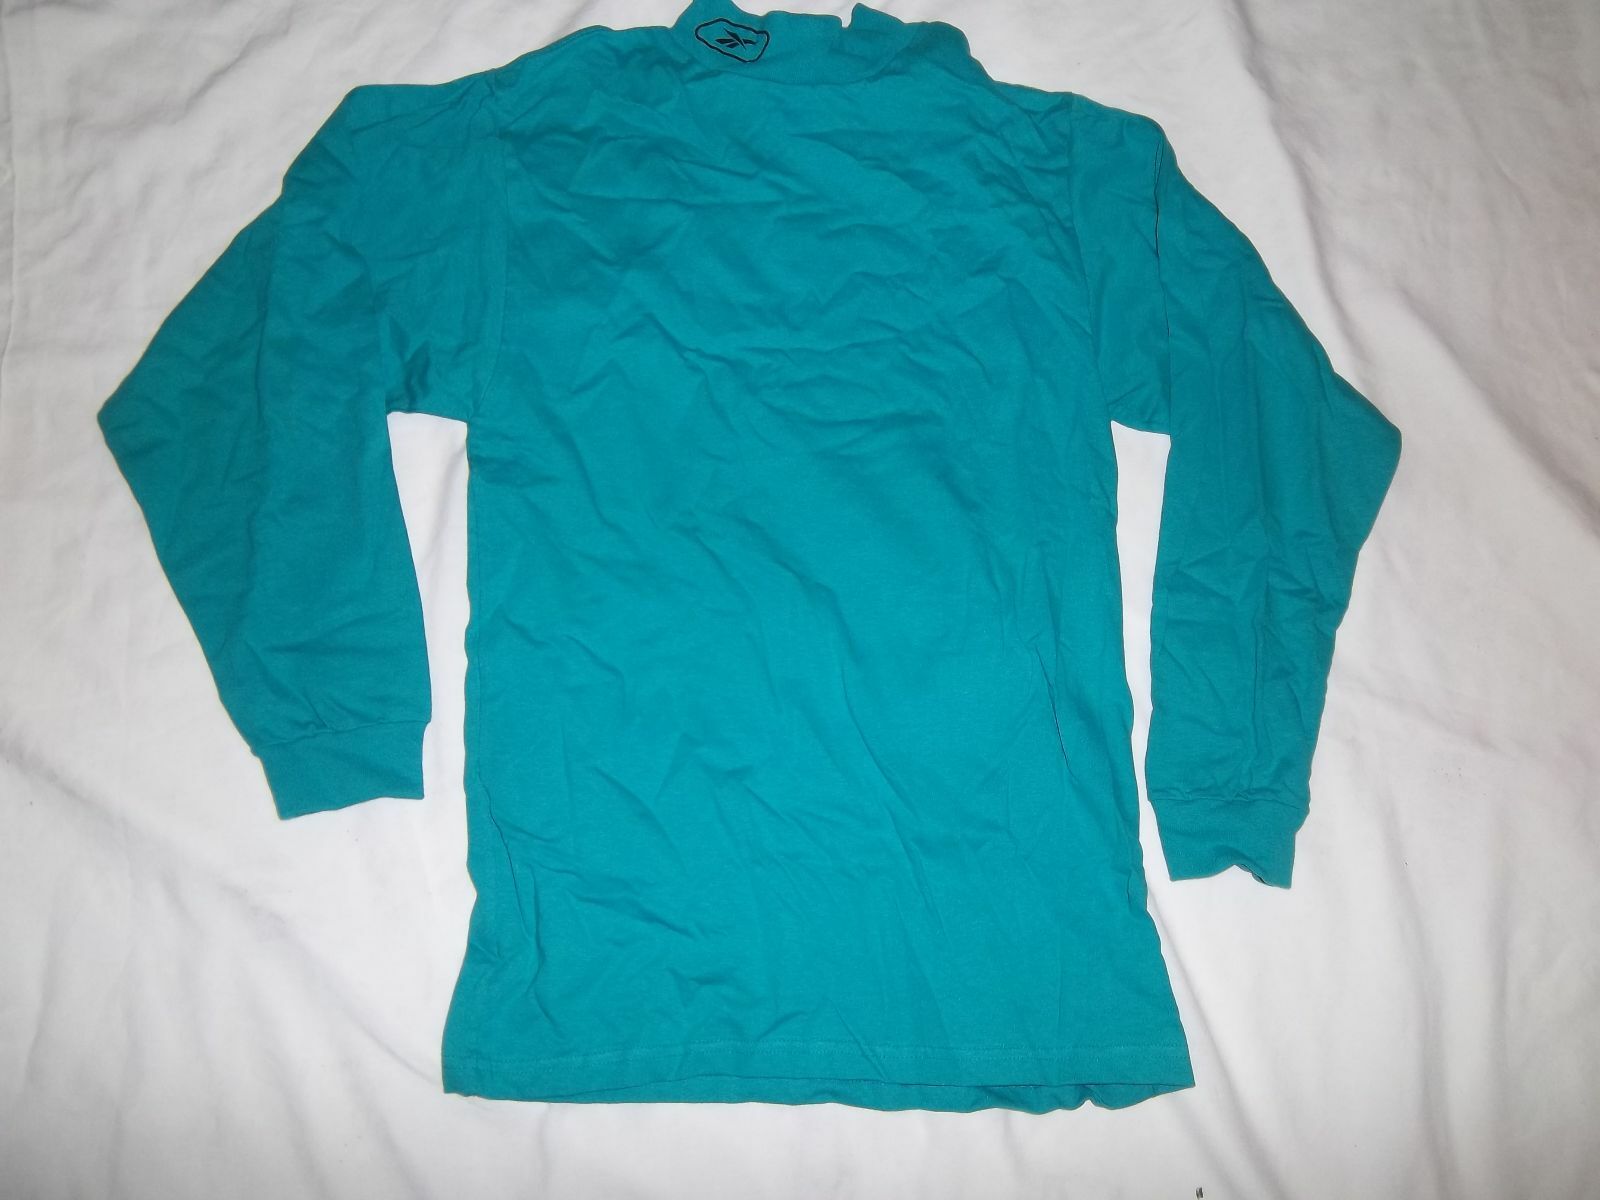 REEBOK ATHLETIC MOCK TURTLE NECK LONG SLEEVE SHIRT (VARIOUS SIZES AND COLORS)